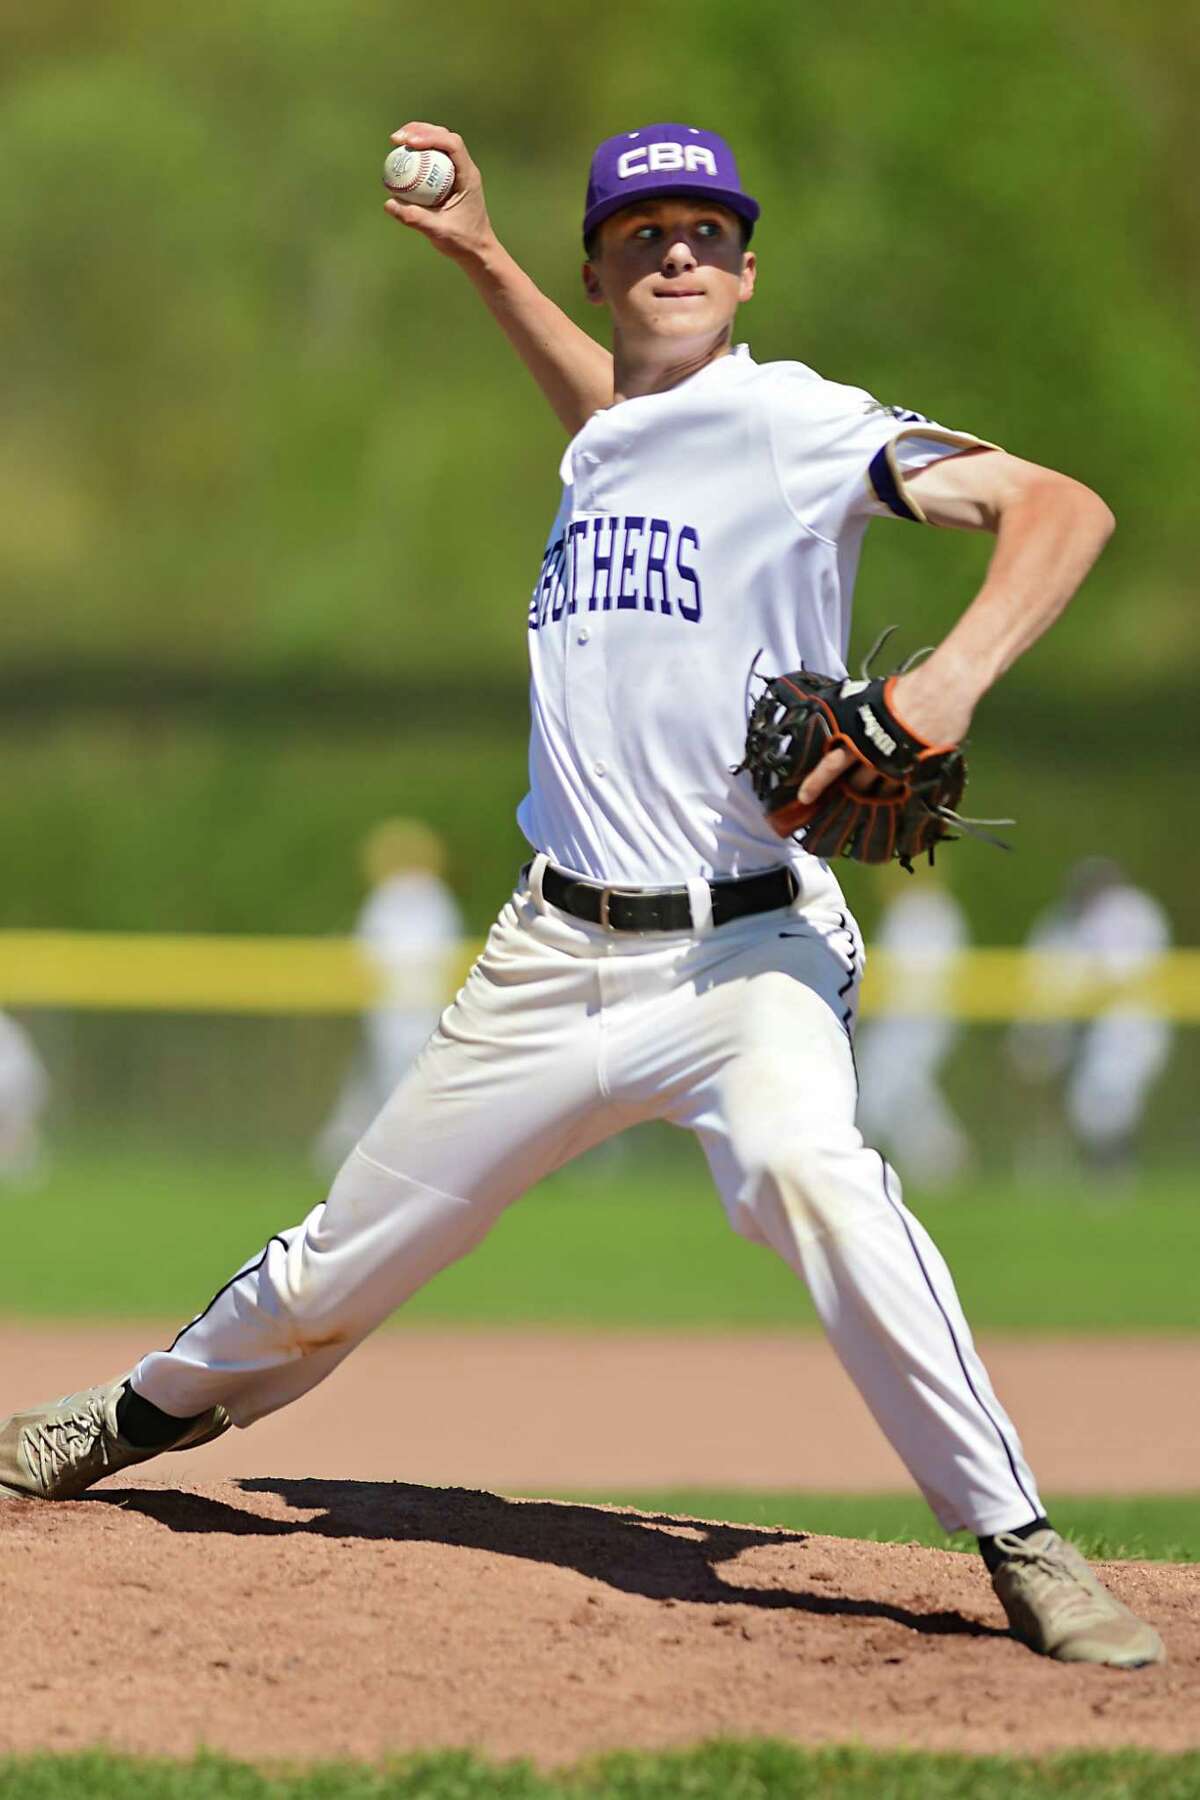 Christian Brothers Academy pitcher Matt Tiberia throws the ball during a baseball game against Shenendehowa on Thursday, May 16, 2019 in Colonie, N.Y. (Lori Van Buren/Times Union)